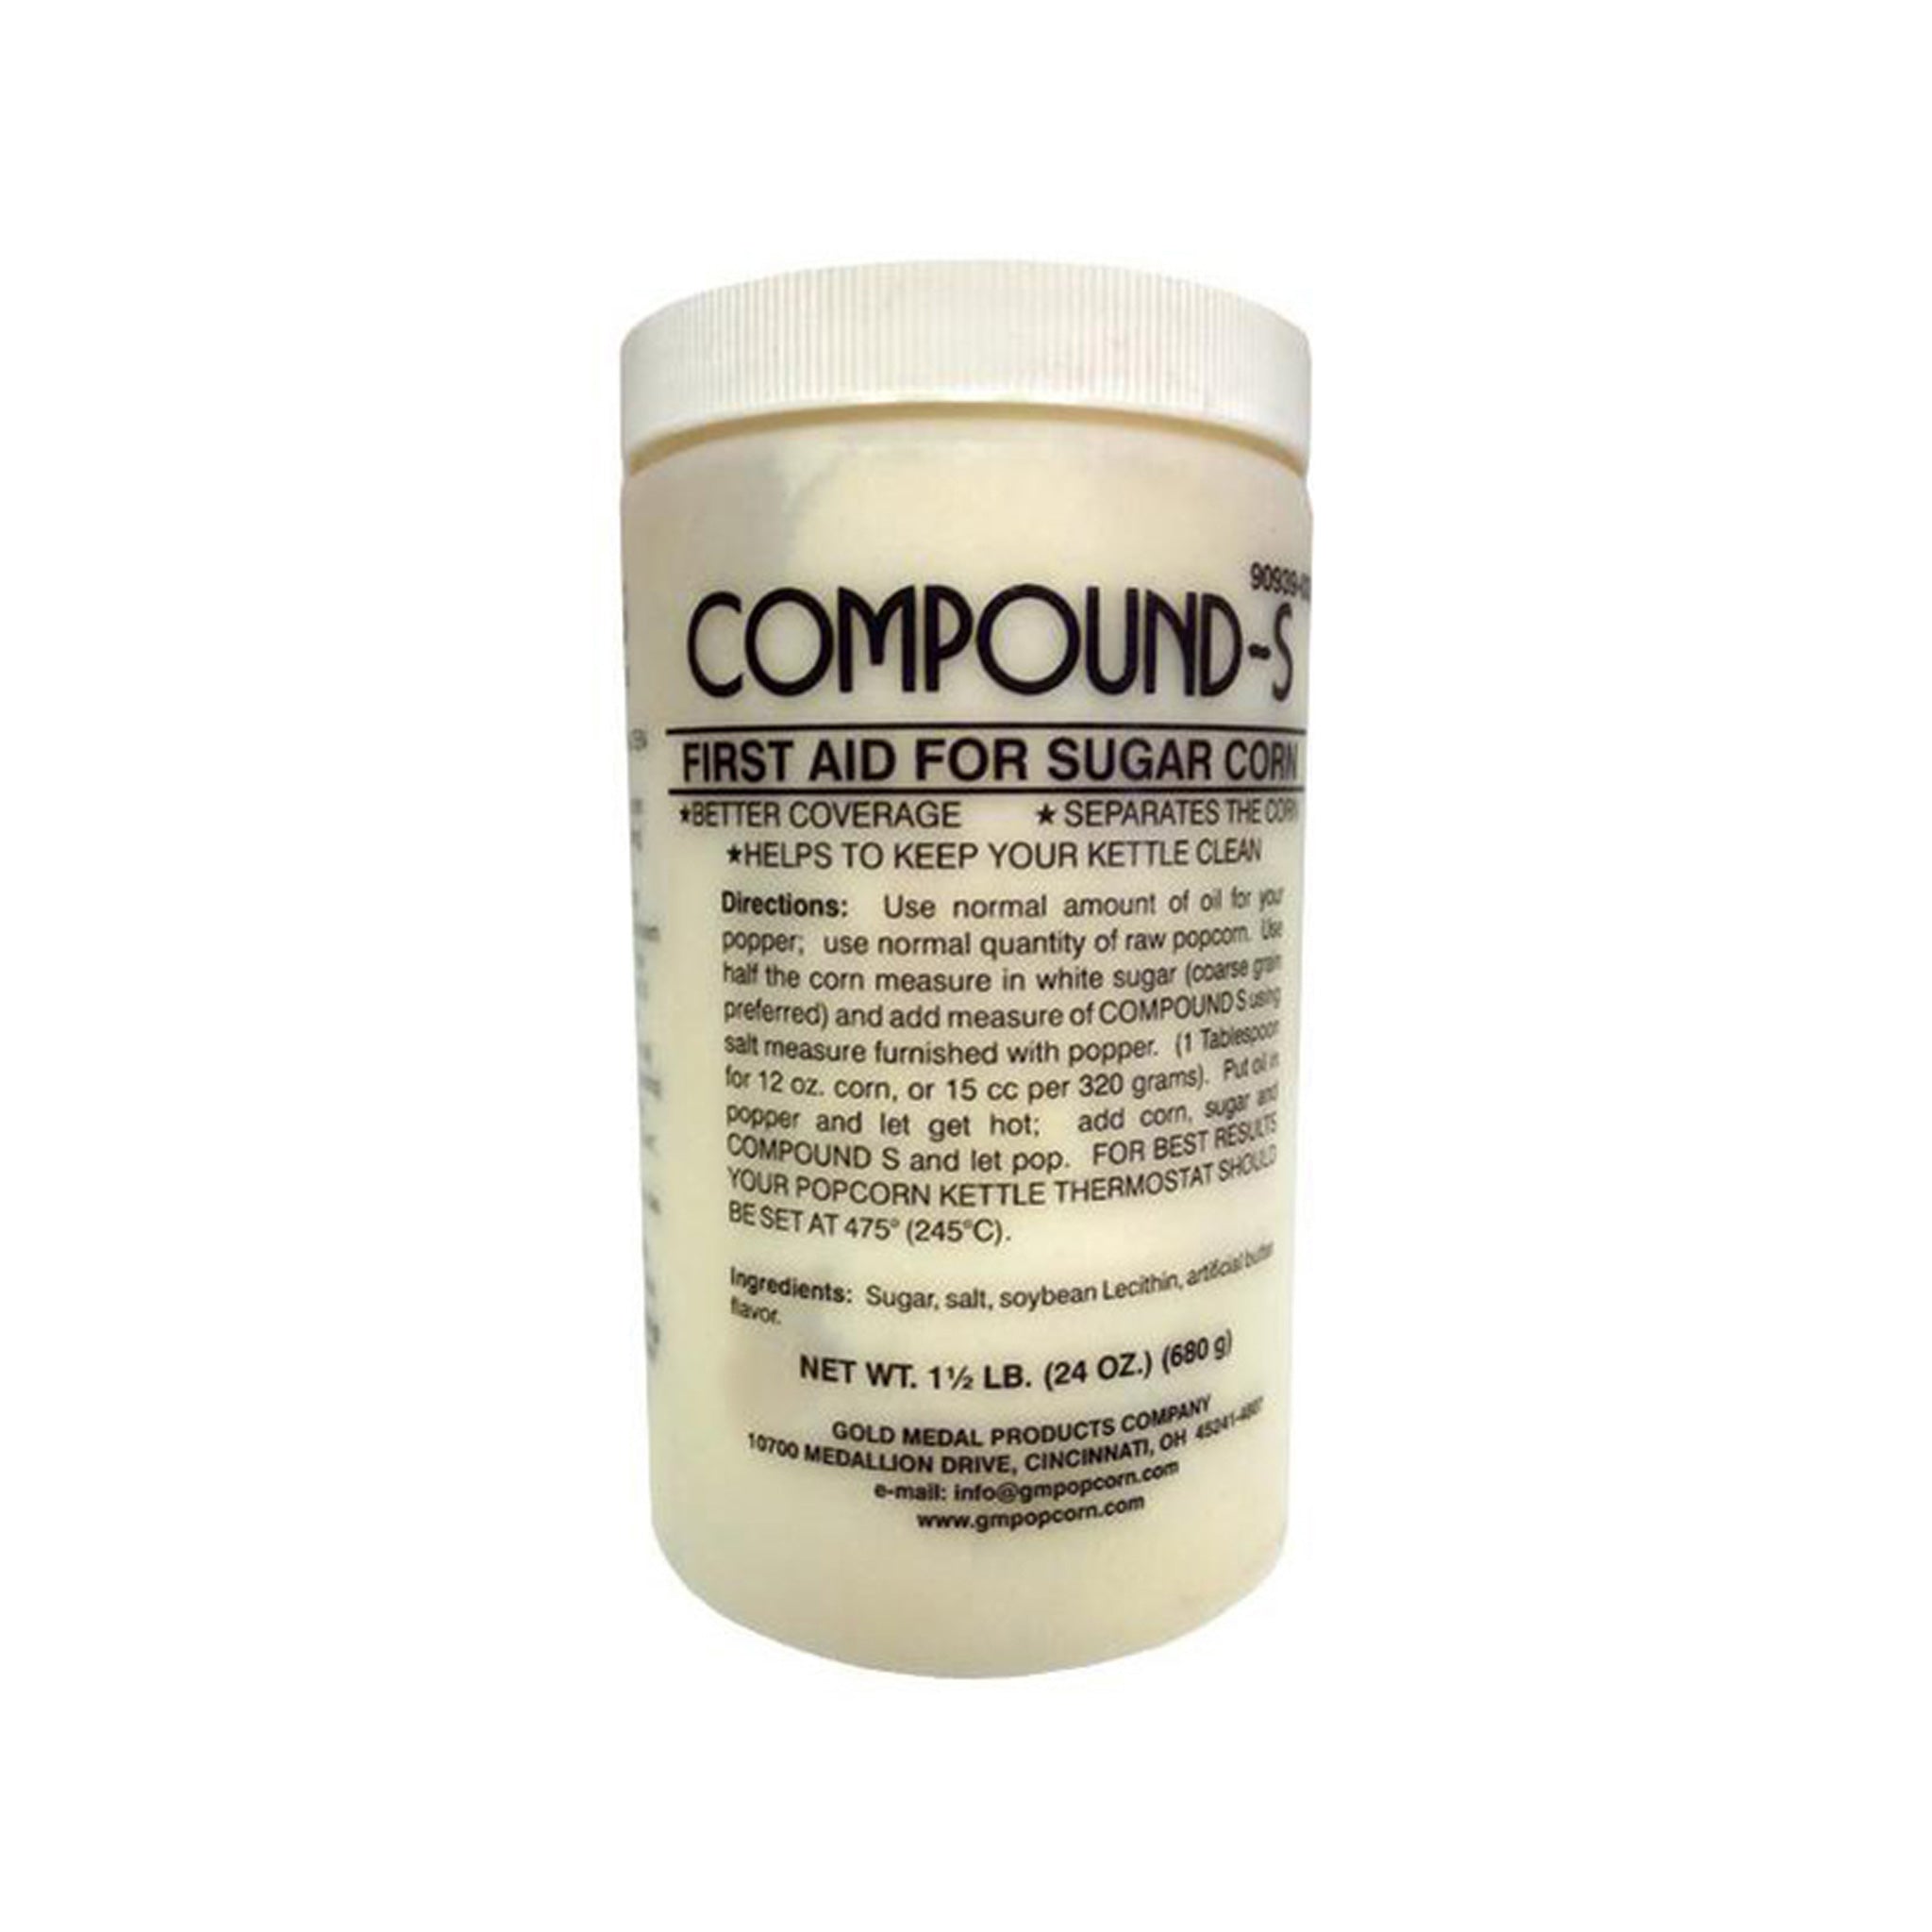 Compound-S First Aid for Sugar Popcorn